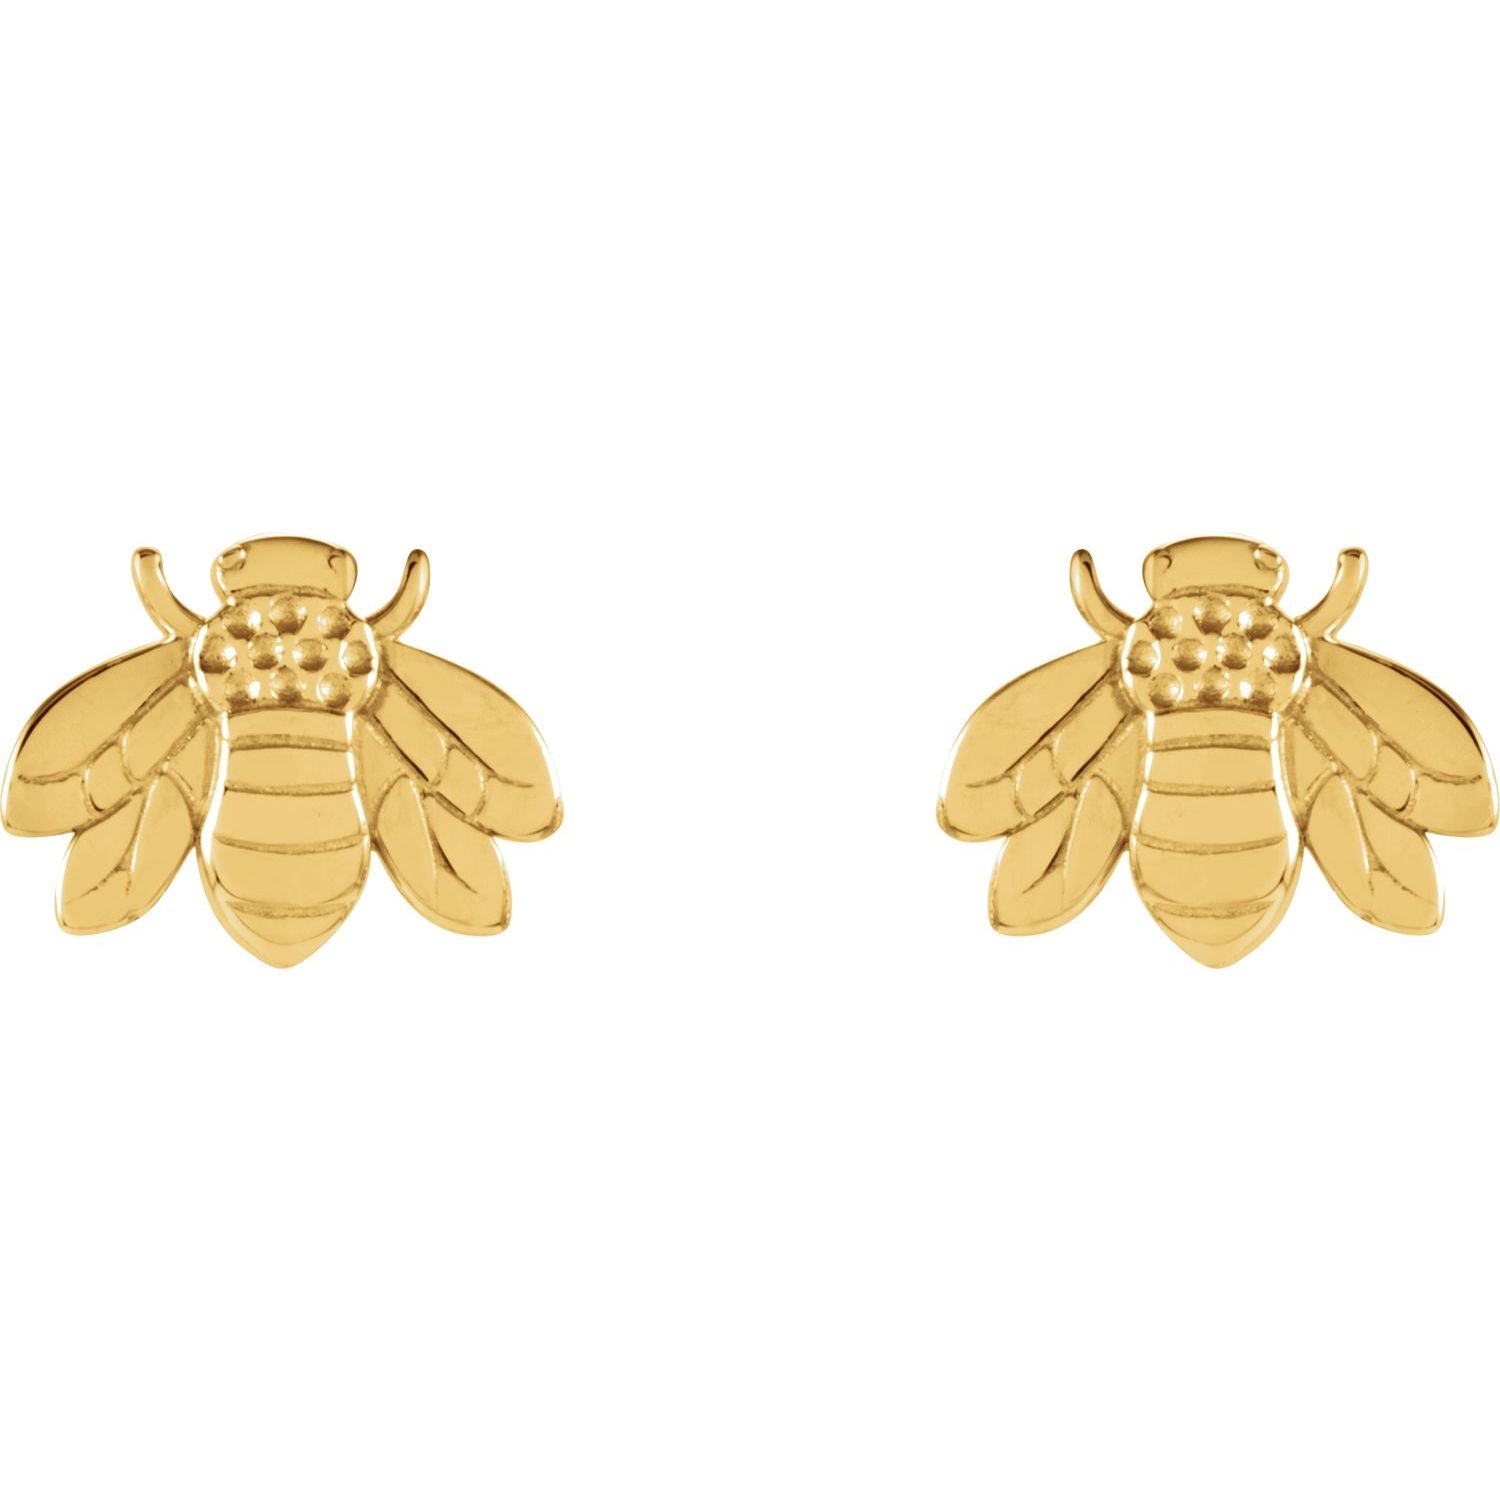 Bees! : The Threadless End